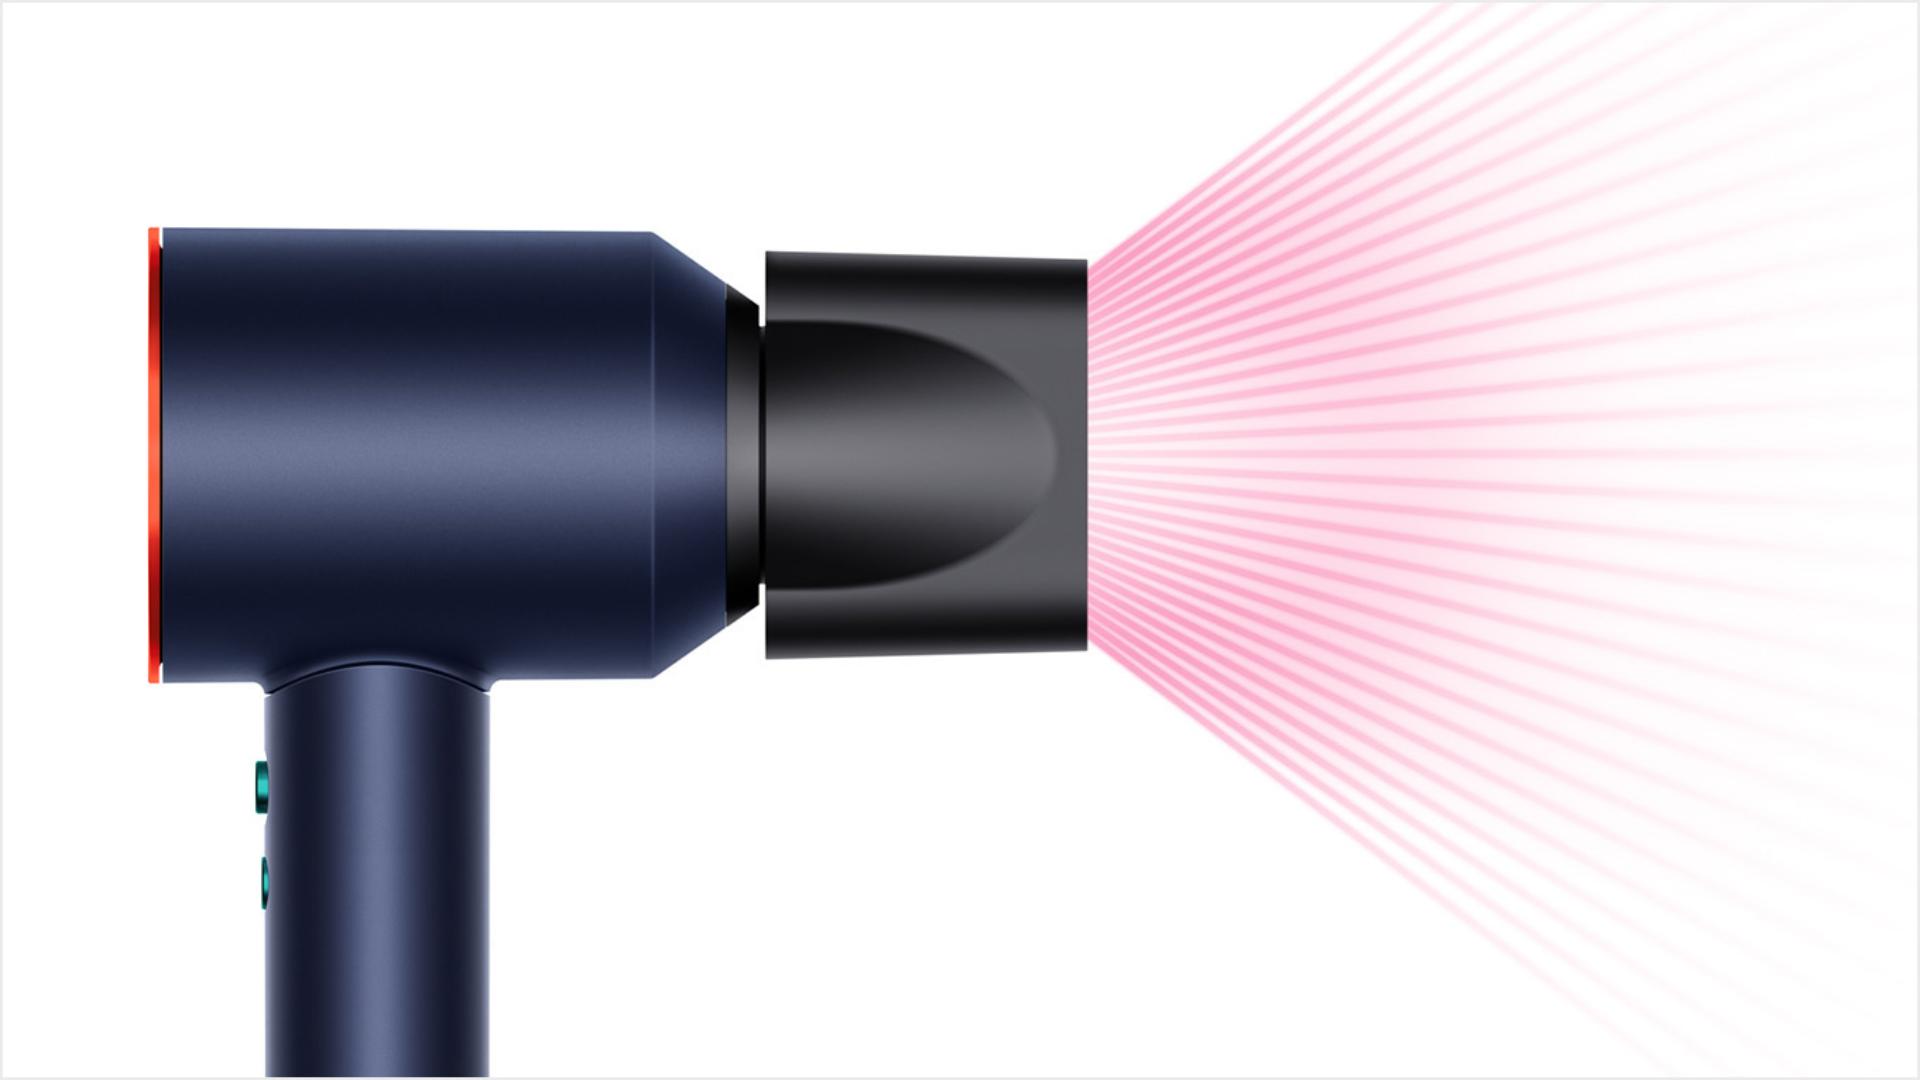 Side view of the Smoothing nozzle with graphic showing airflow.